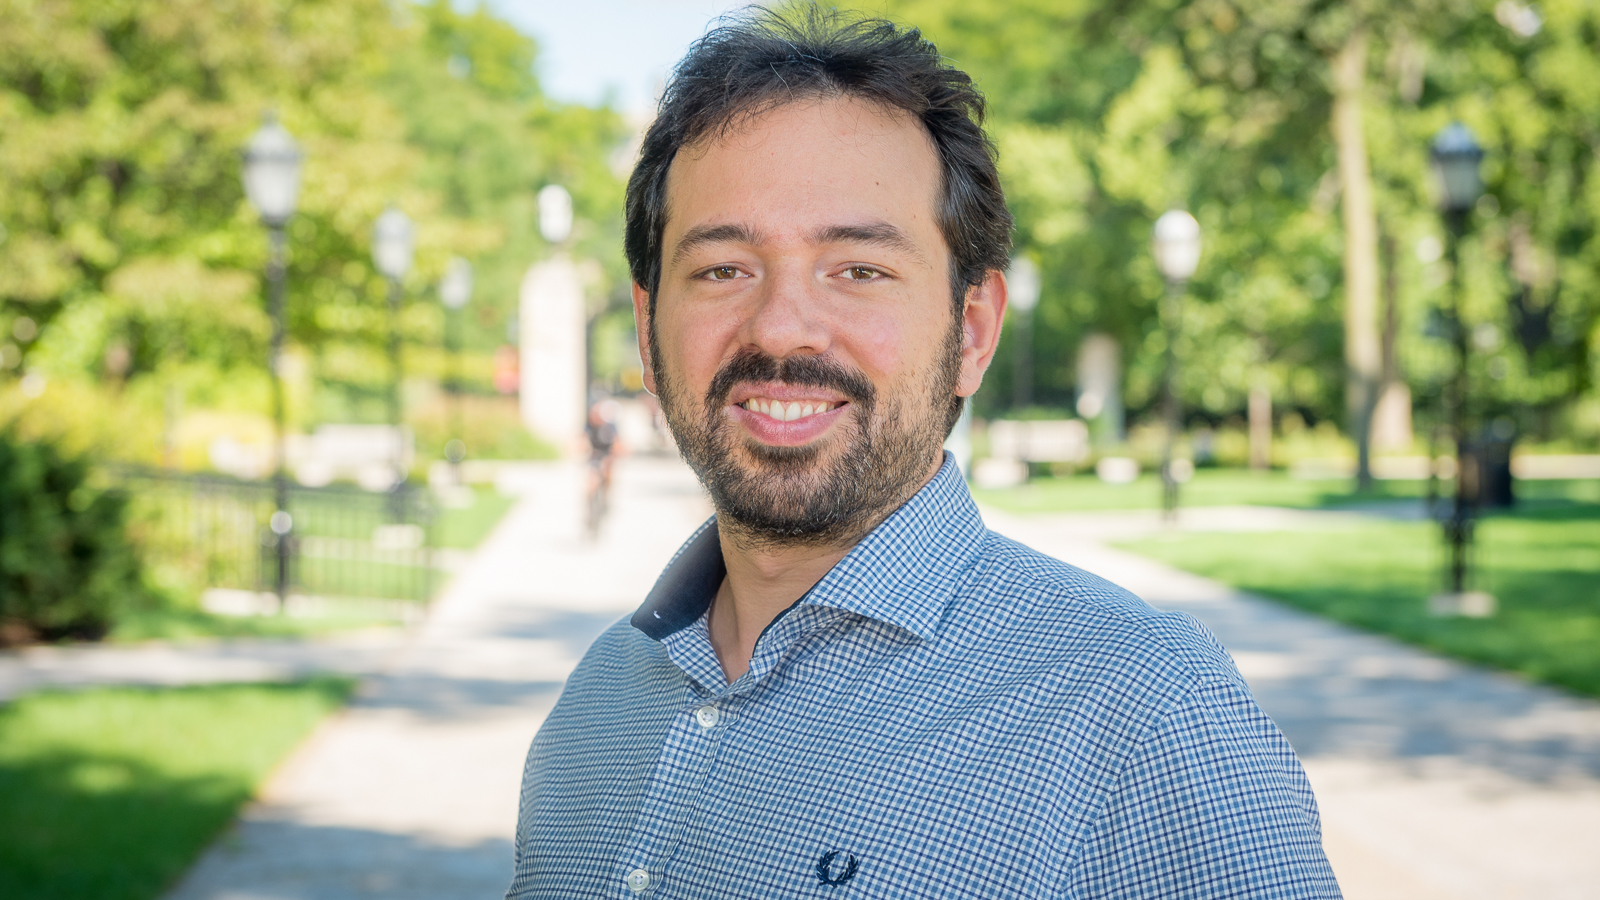 Marco Govoni, a scientist in Argonne’s MSD and CME, aims to create computational models to accelerate development of materials for quantum applications. (Image by University of Chicago.)